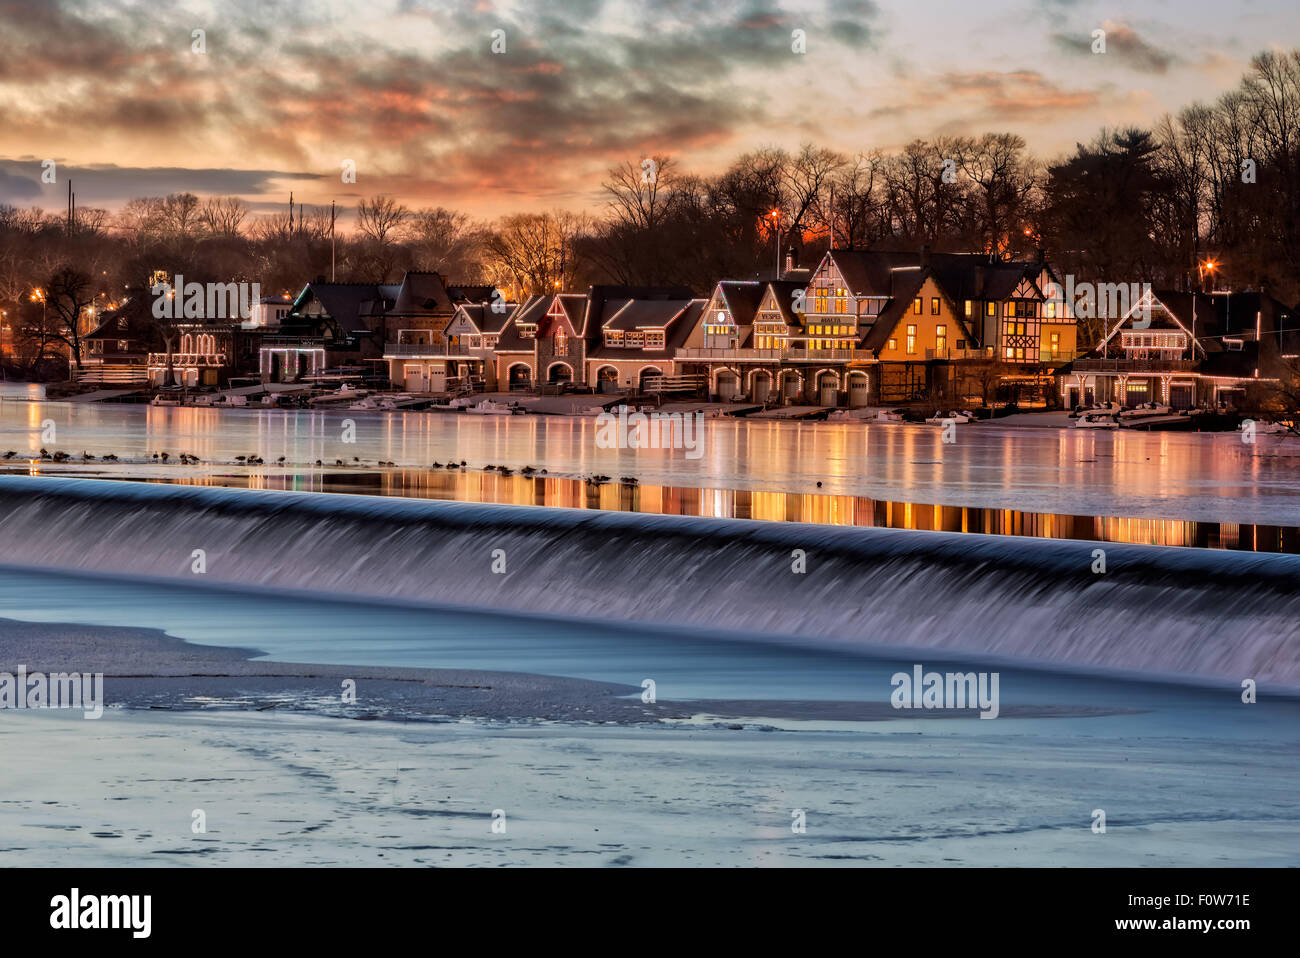 Boathouse Row Philadelphia, Pennsylvania - Computerized LED lights turn on to illuminate and outline each of the houses at Boathouse Row. The colorful lights are reflected on the frozen waters of the east bank of the Schuylkill River as is the colors of the setting sun and sky. Seen in the foreground is the Fairmount Water Works on the Schuylkill river dam. Boathouse Row hosts several major rowing regattas, it  is a National Historic Landmark and was listed on the National Register of Historic Places in 1987. Stock Photo